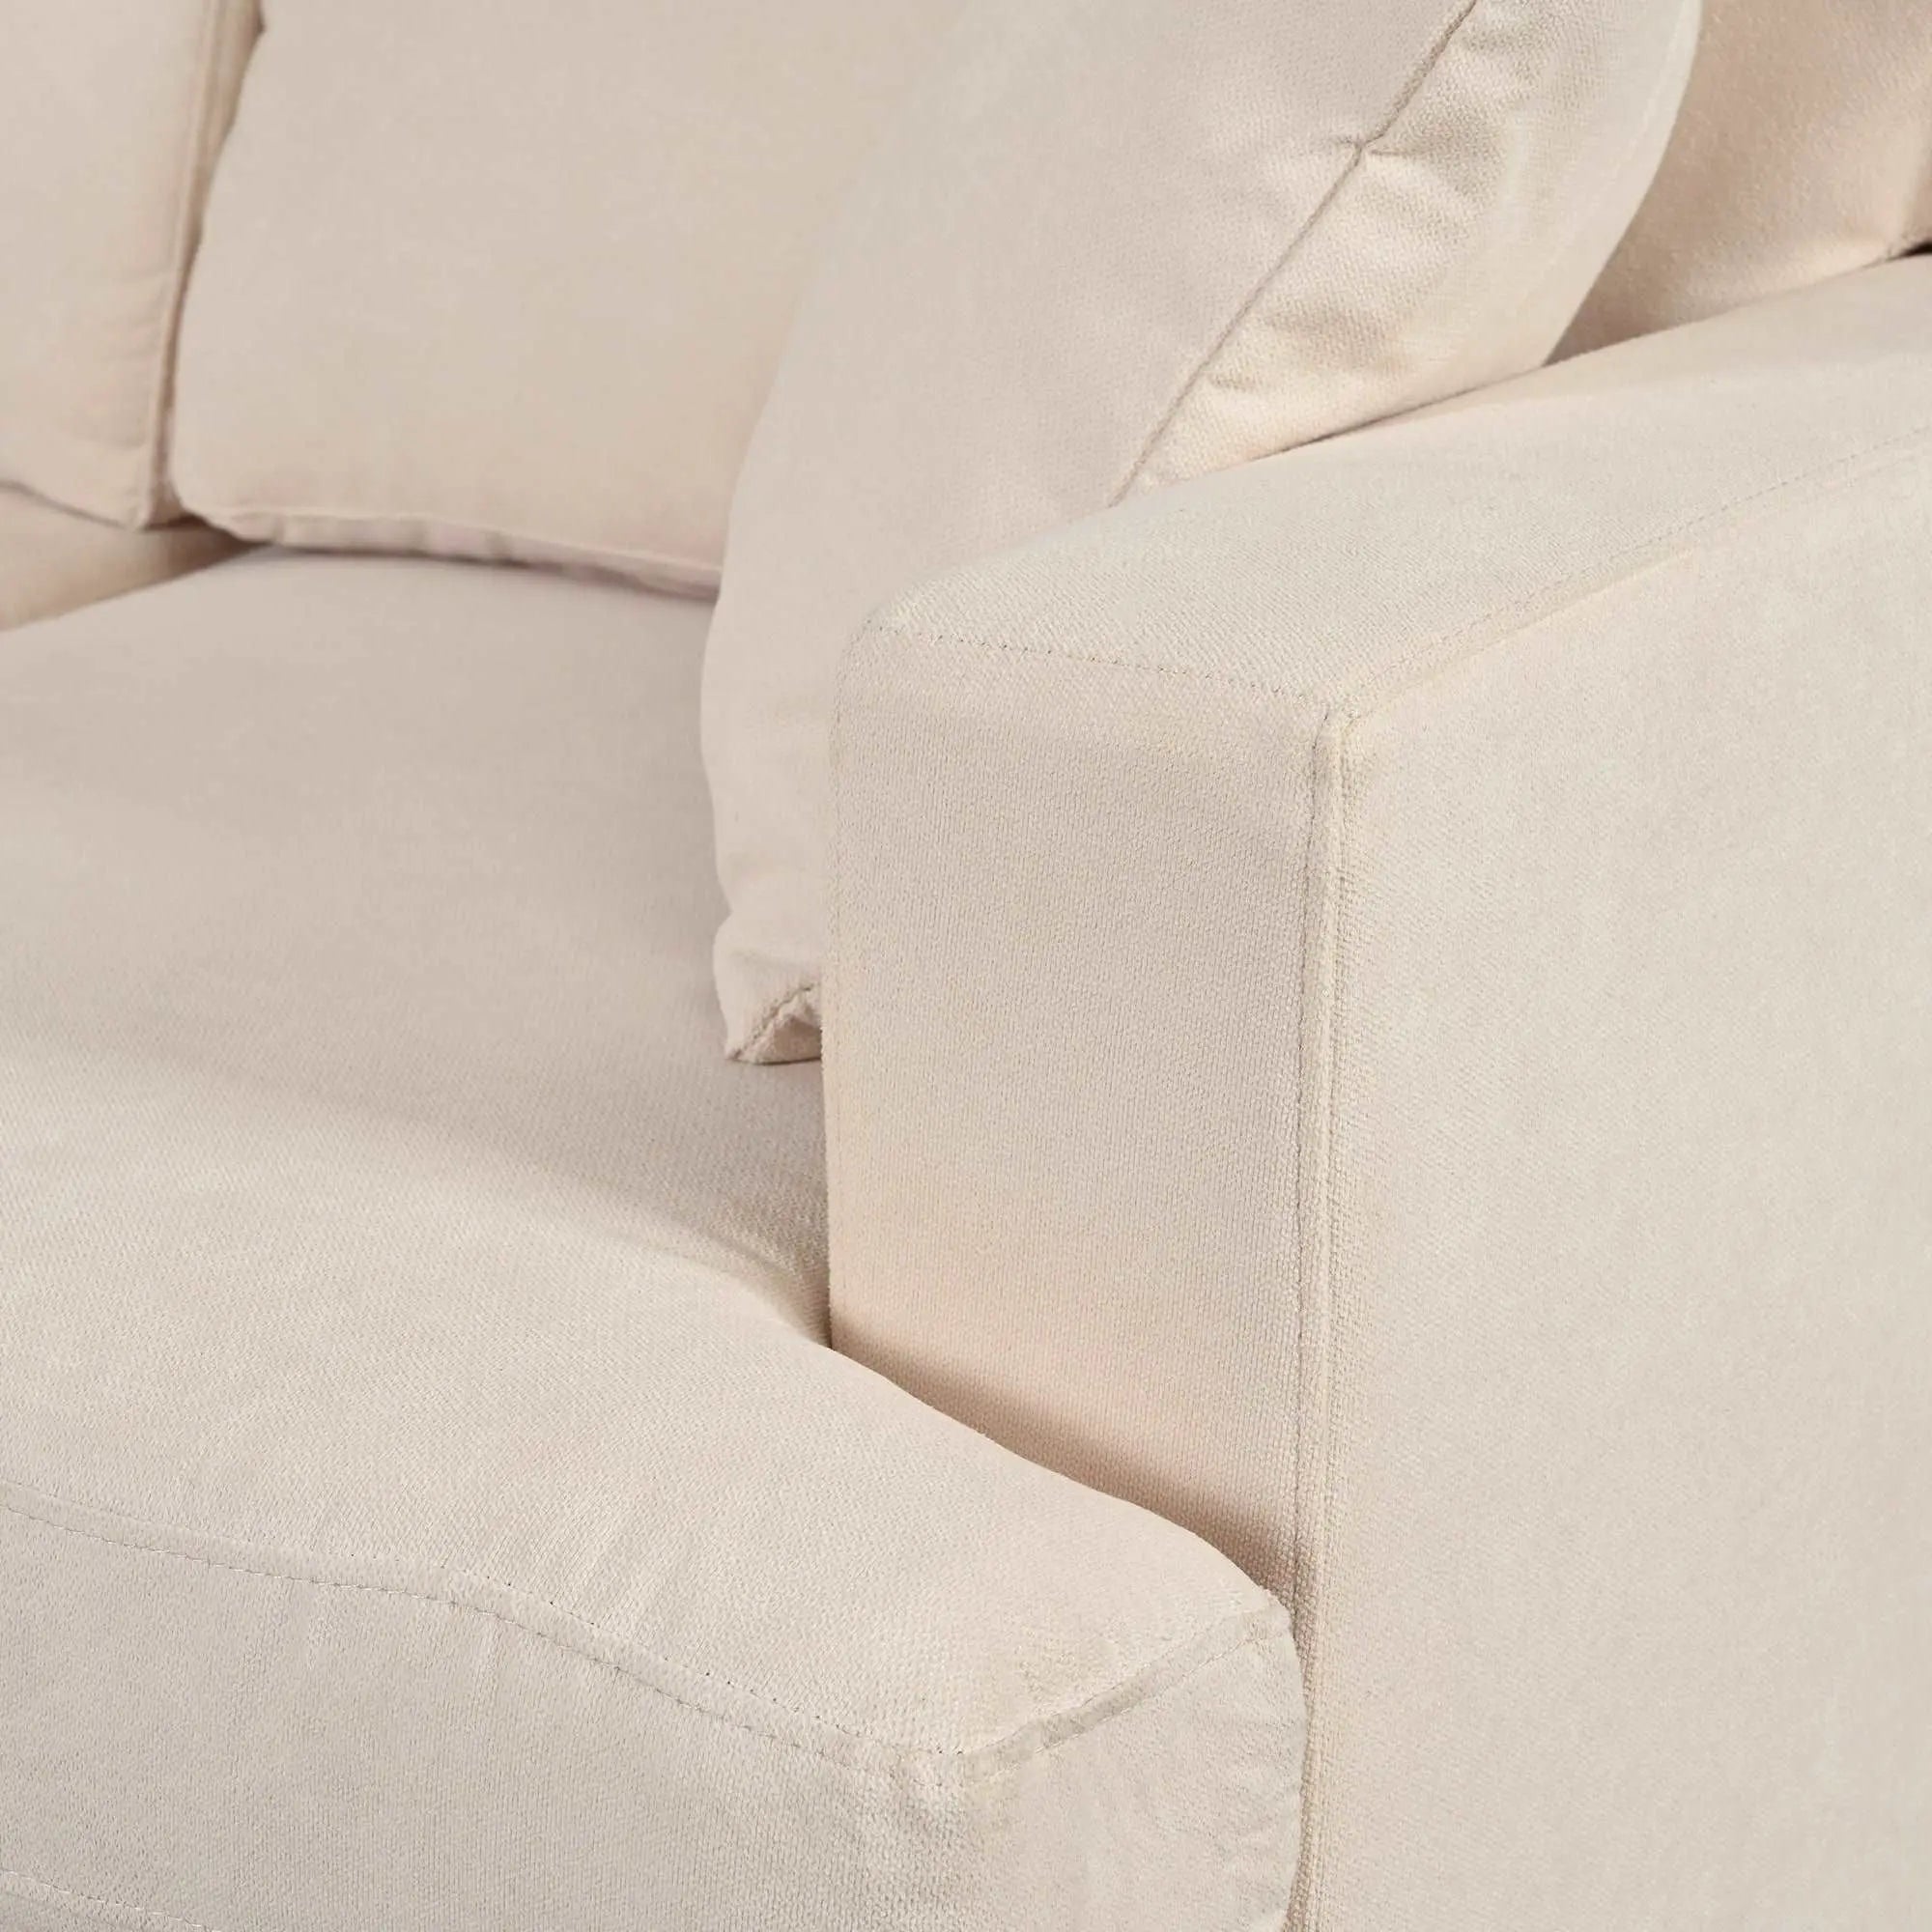 Bellemave 111.4" 3 Seat Streamlined Sofa with Removable Back and Seat Cushions and 2 pillows